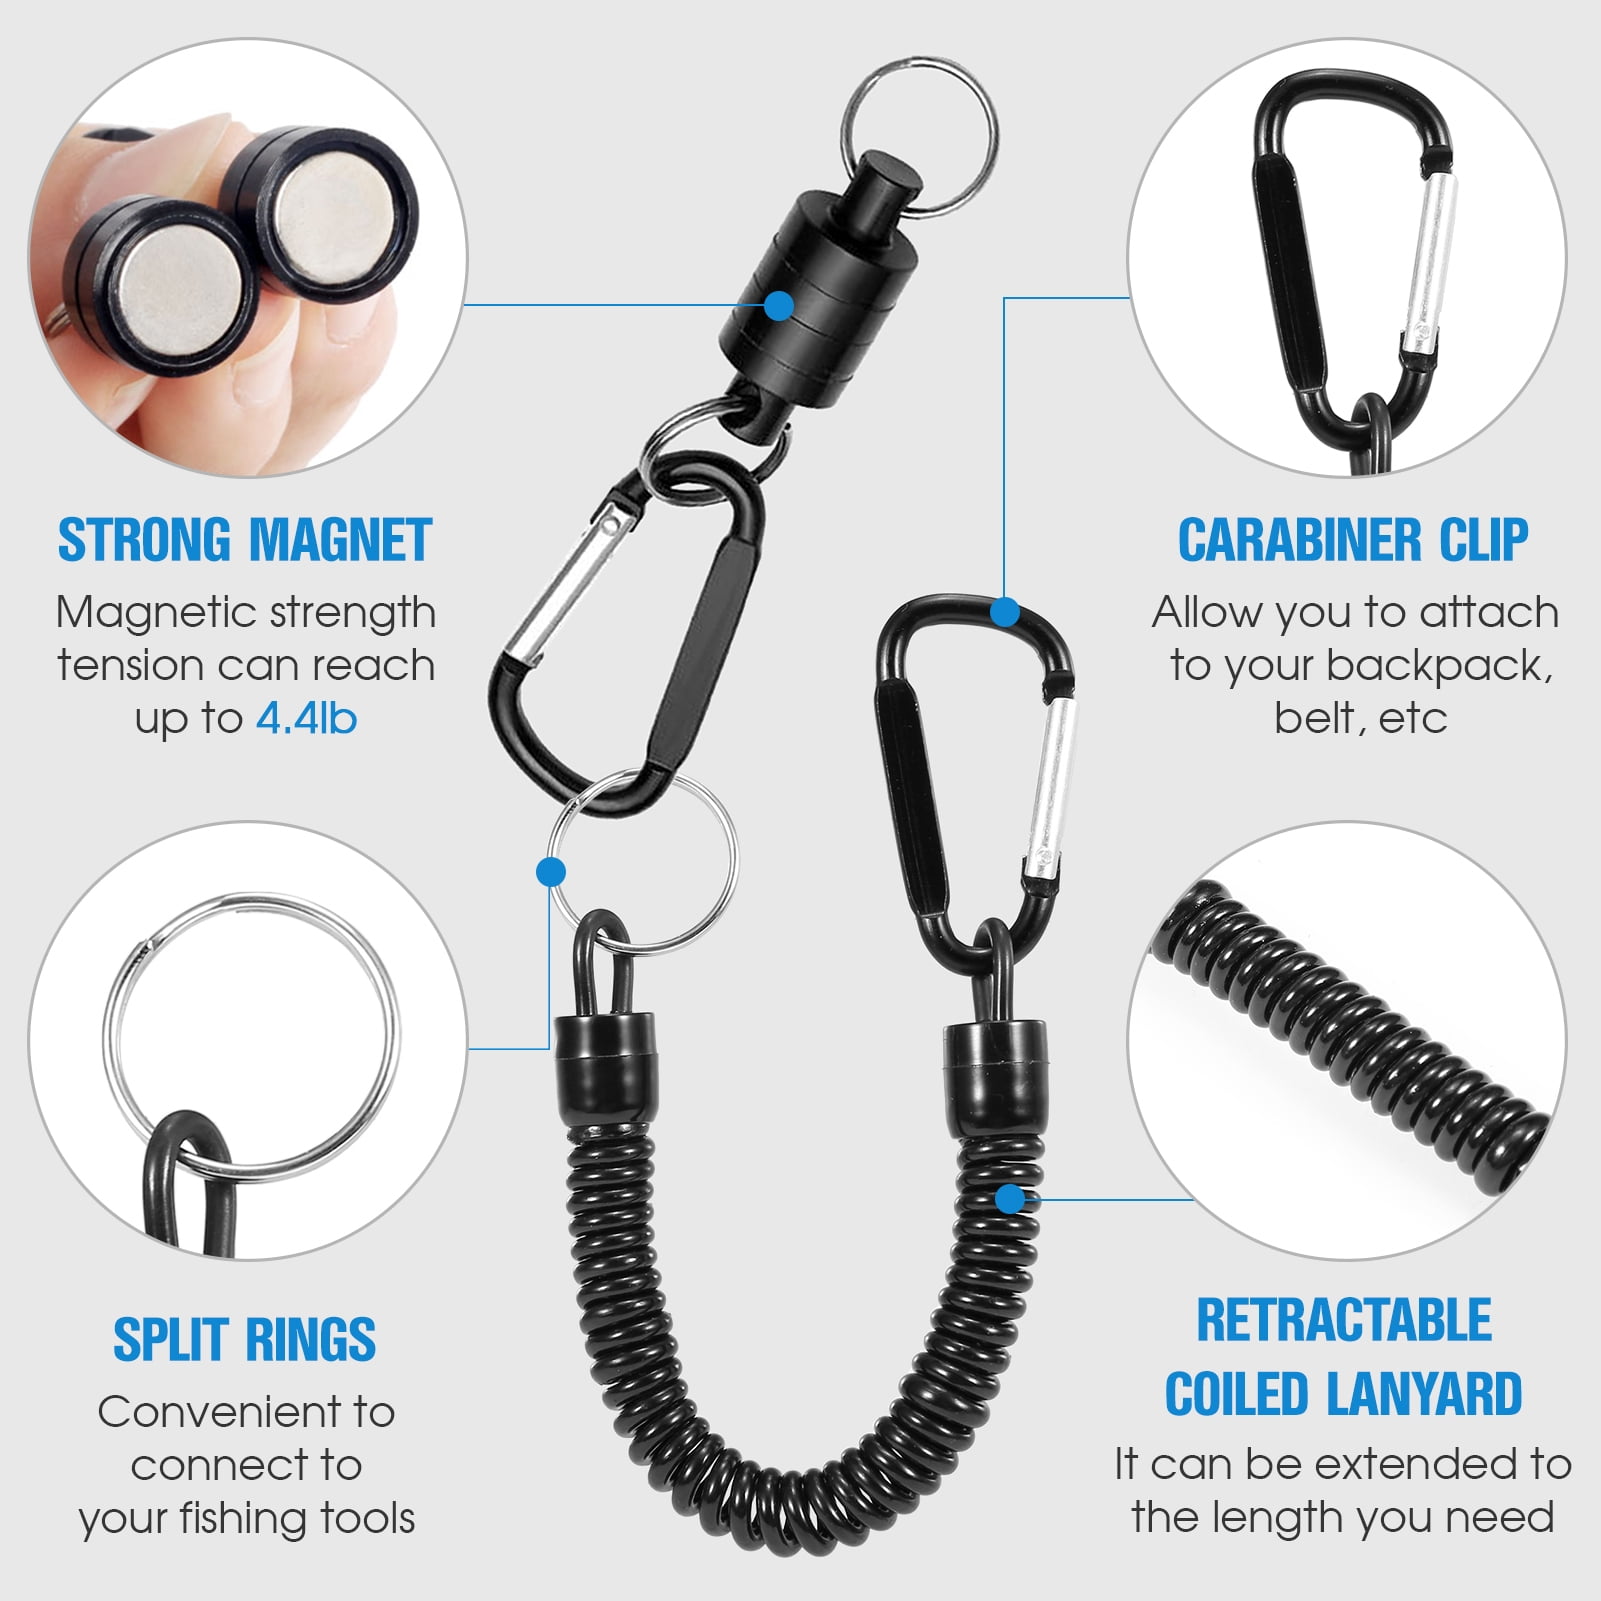 Magnetic Tool Release Holder with Carabiner Clip Fly Fishing Net